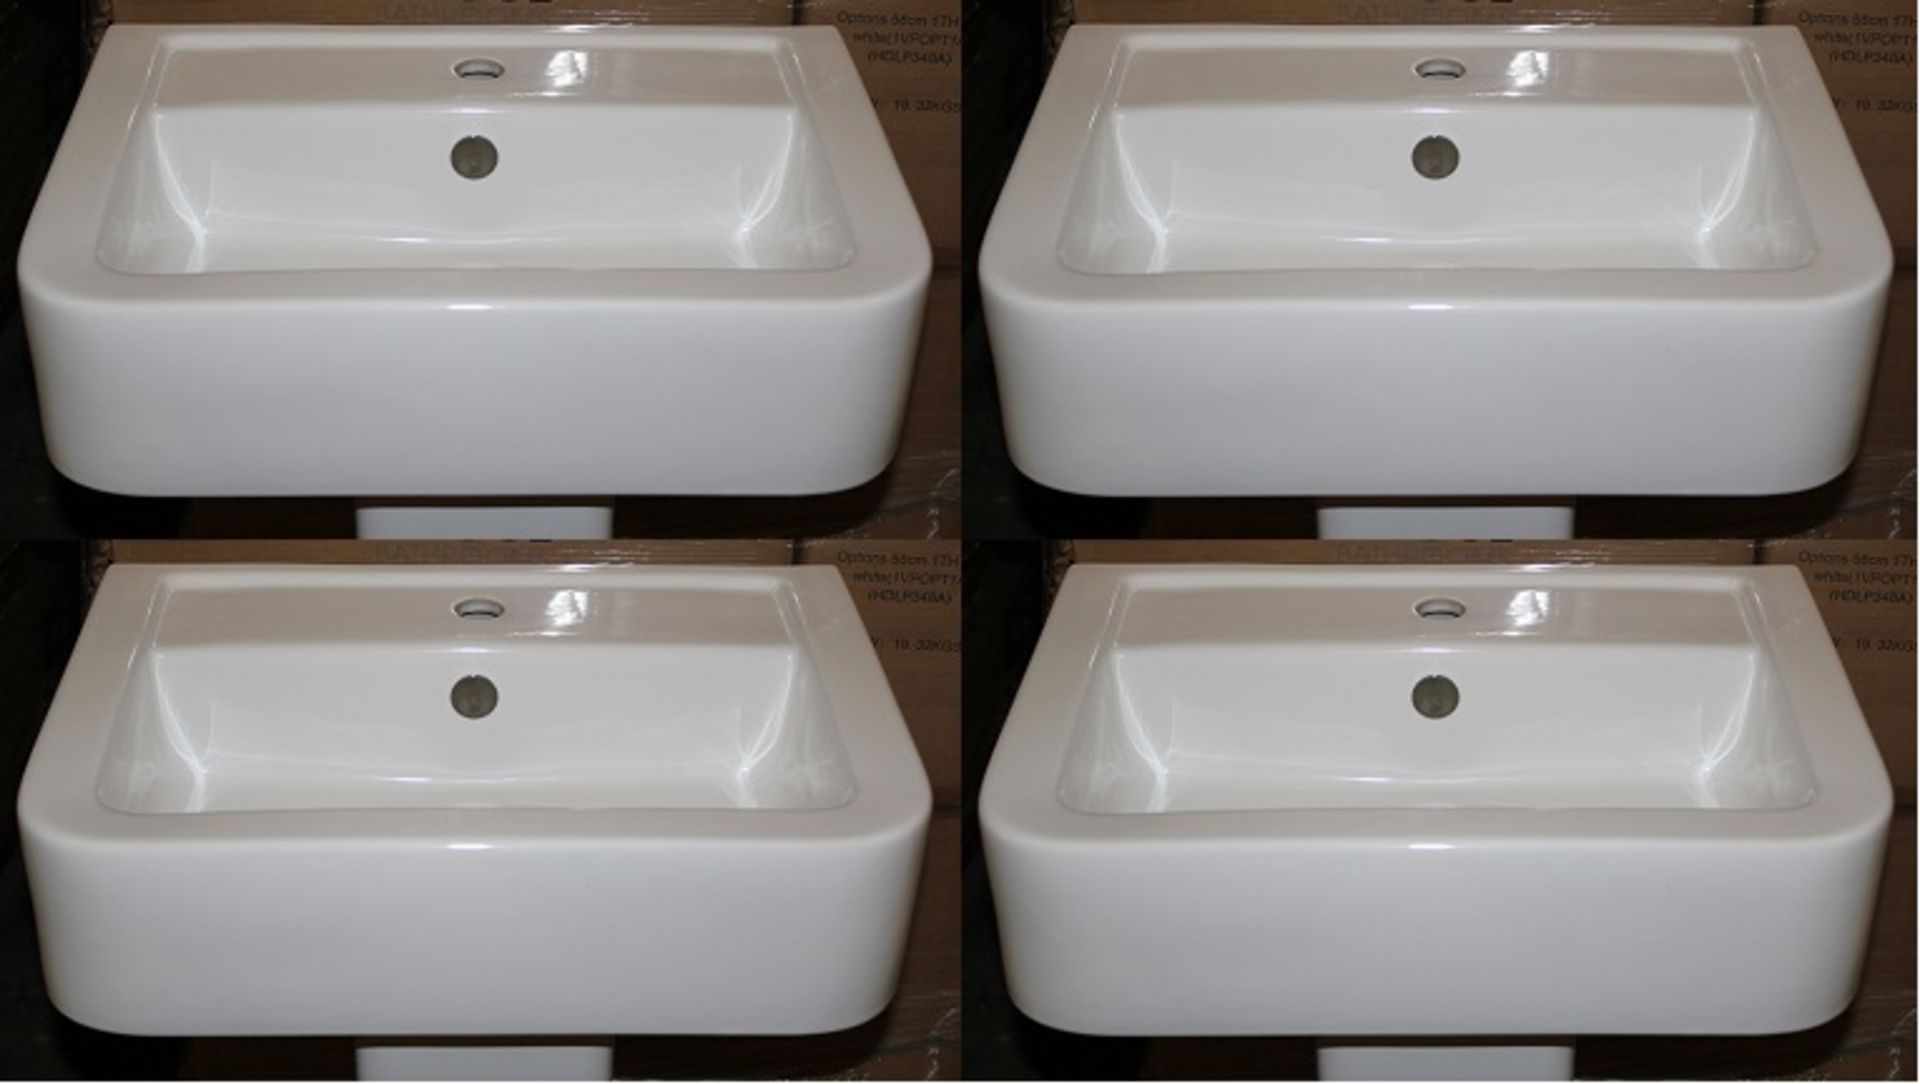 4 x Vogue Bathrooms OPTIONS Single Tap Hole SINK BASINS With Pedestals - 580mm Width - Brand New - Image 2 of 7